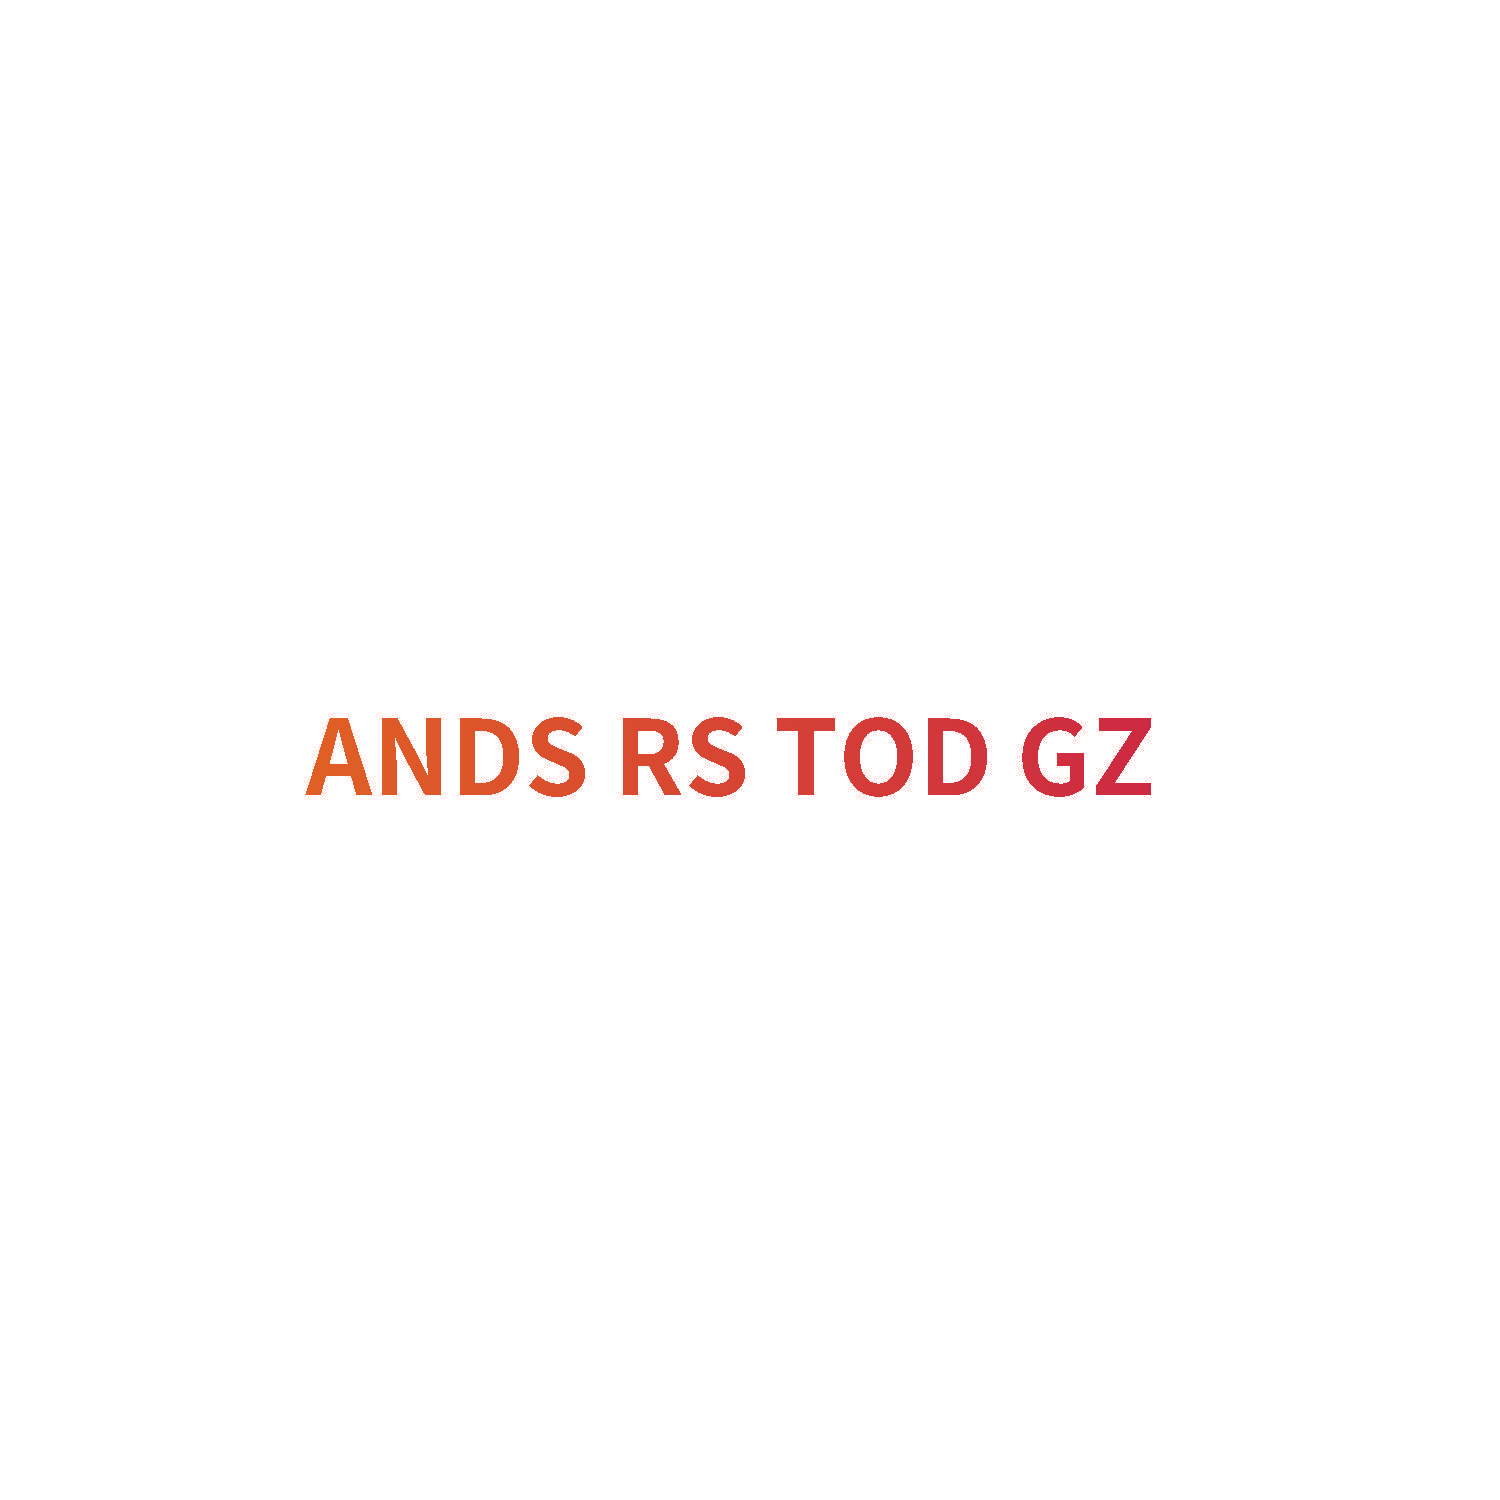 ANDS RS TOD GZ